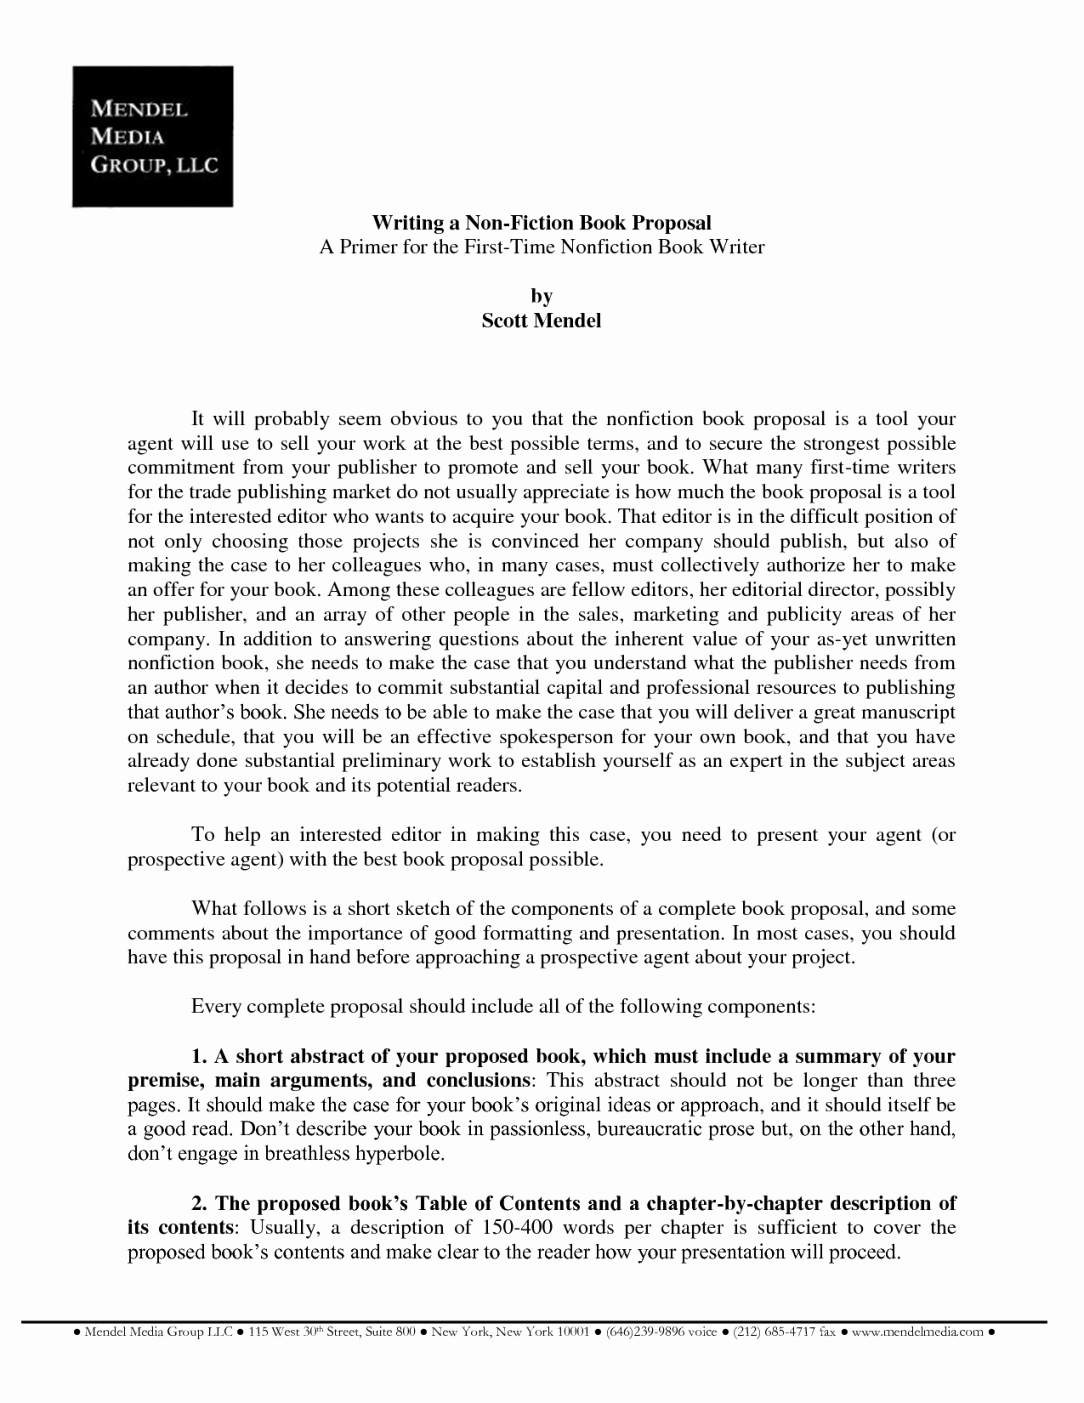 Nonfiction Book Proposal Template New Nonfiction Book Proposal Cover Letter Sample 13 Best Query